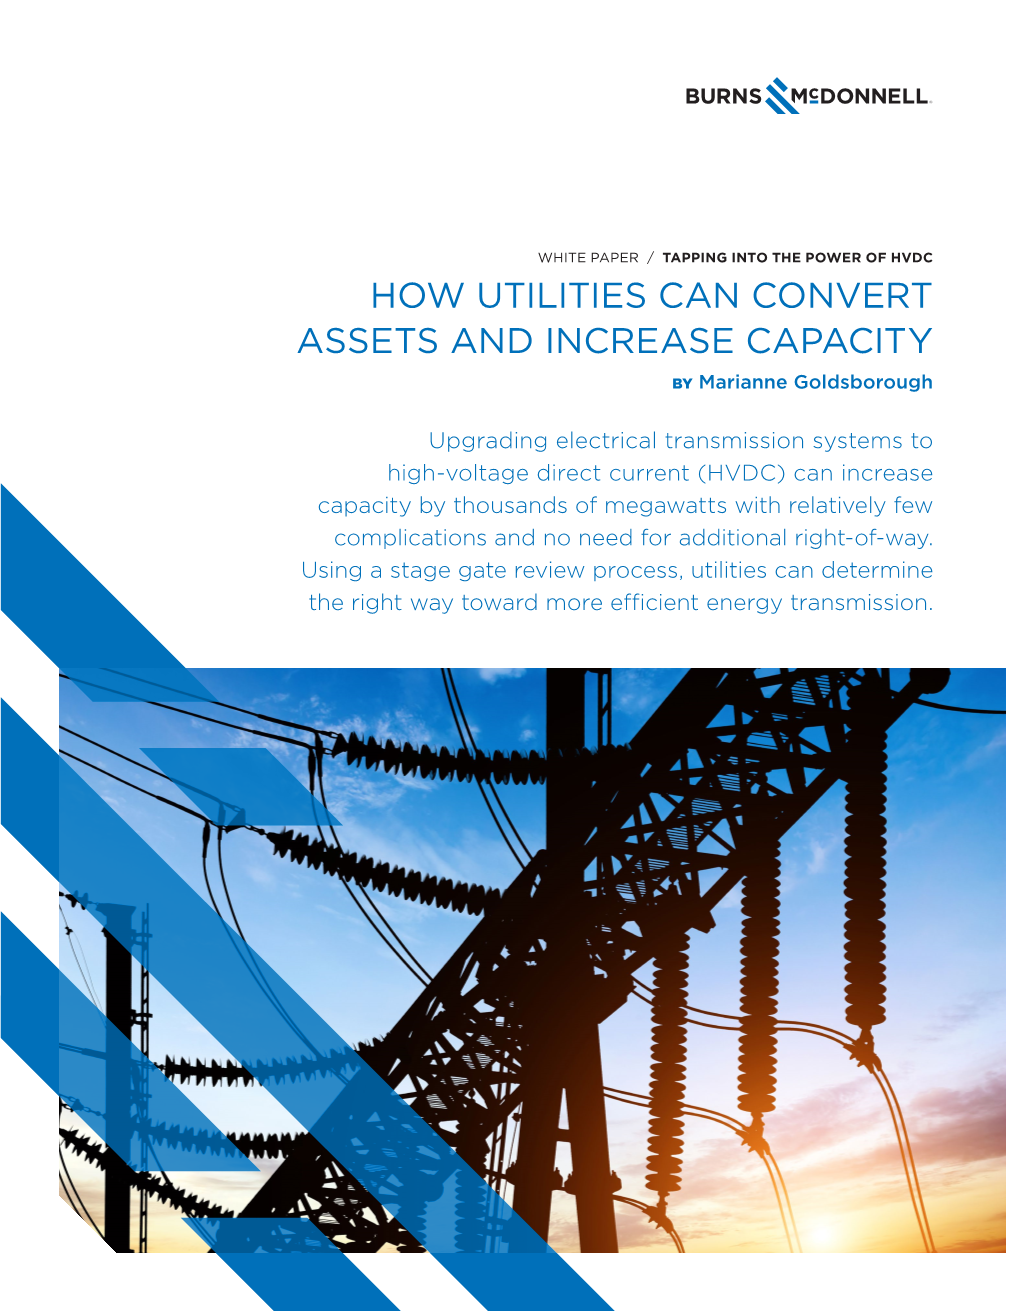 How Utilities Can Convert Assets and Increase Capacity